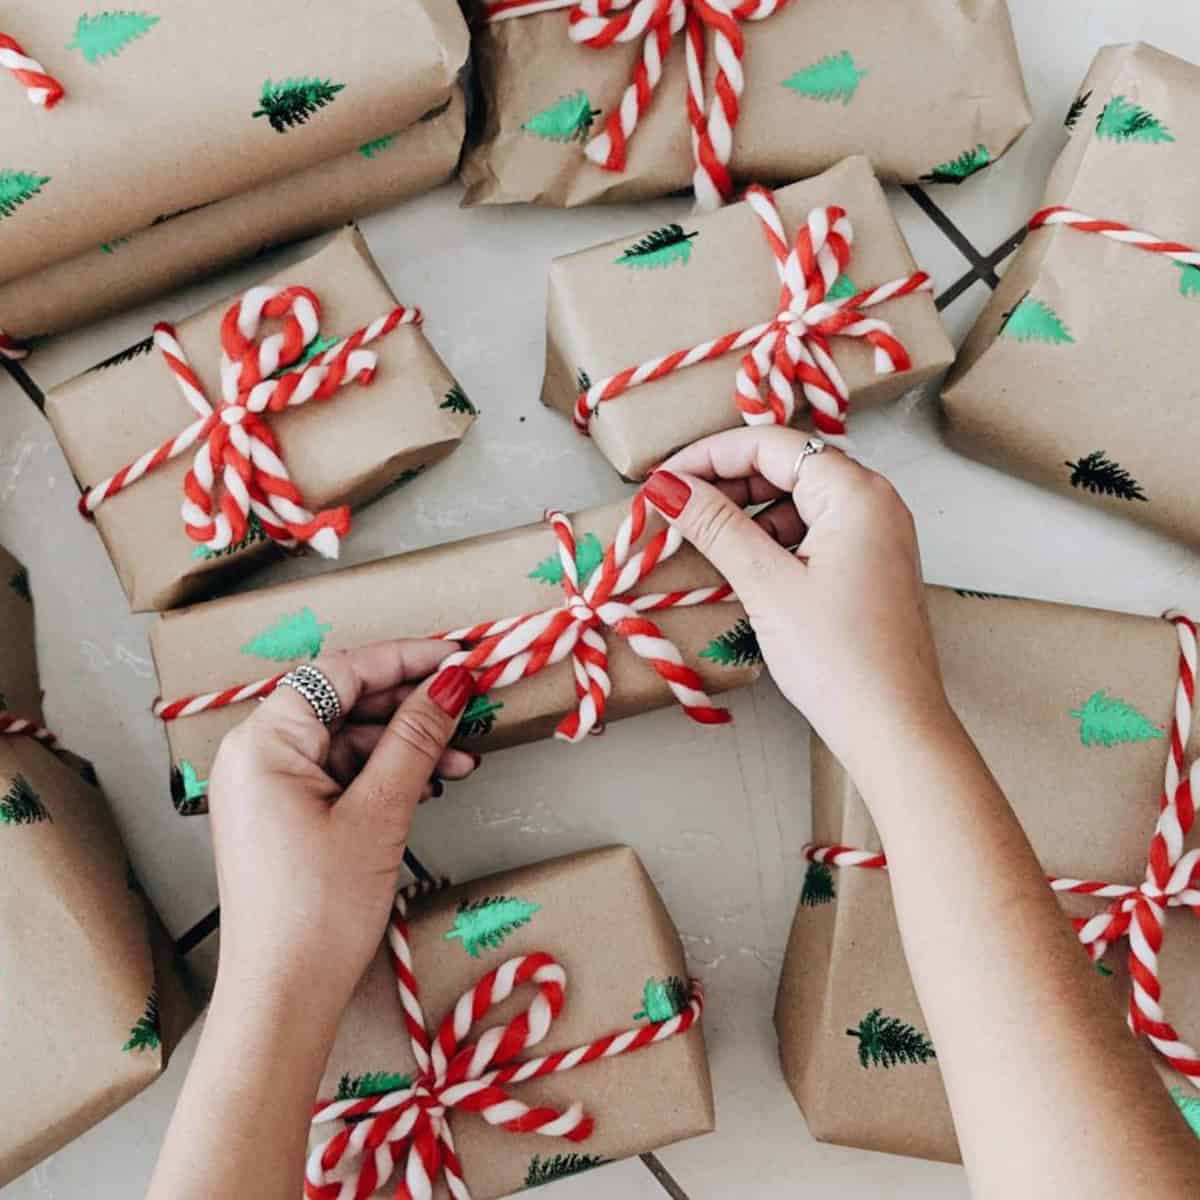 hands wrapping gifts in brown paper with red and white string